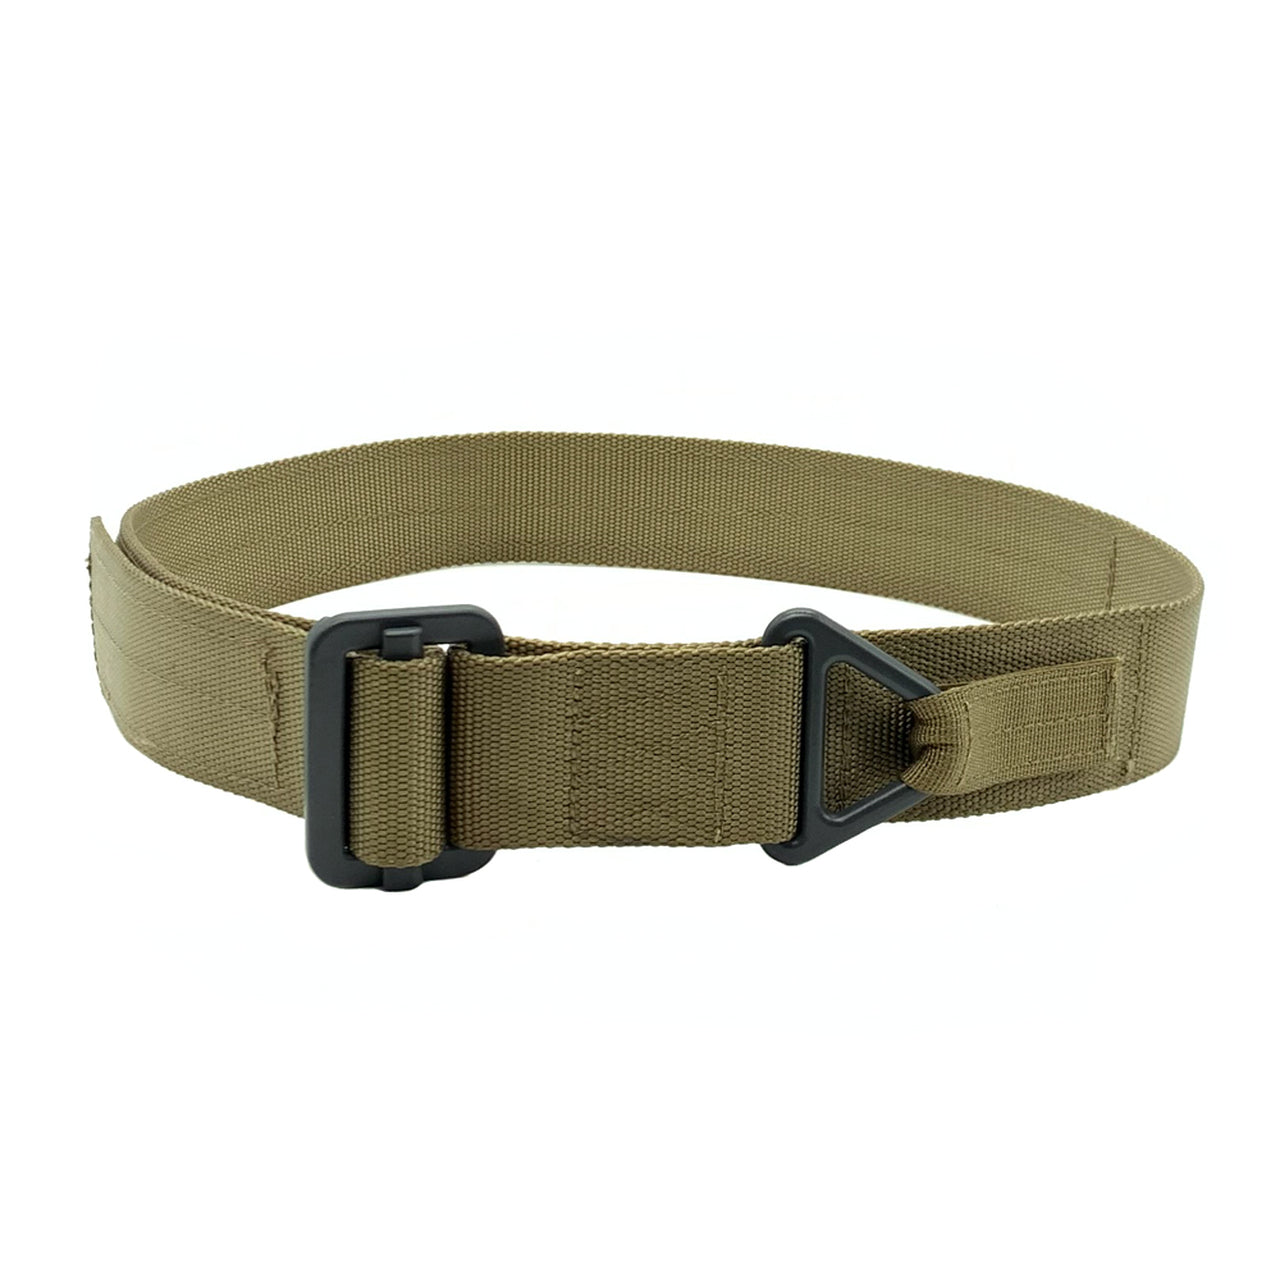 A Shellback Tactical Riggers Belt with a black buckle.